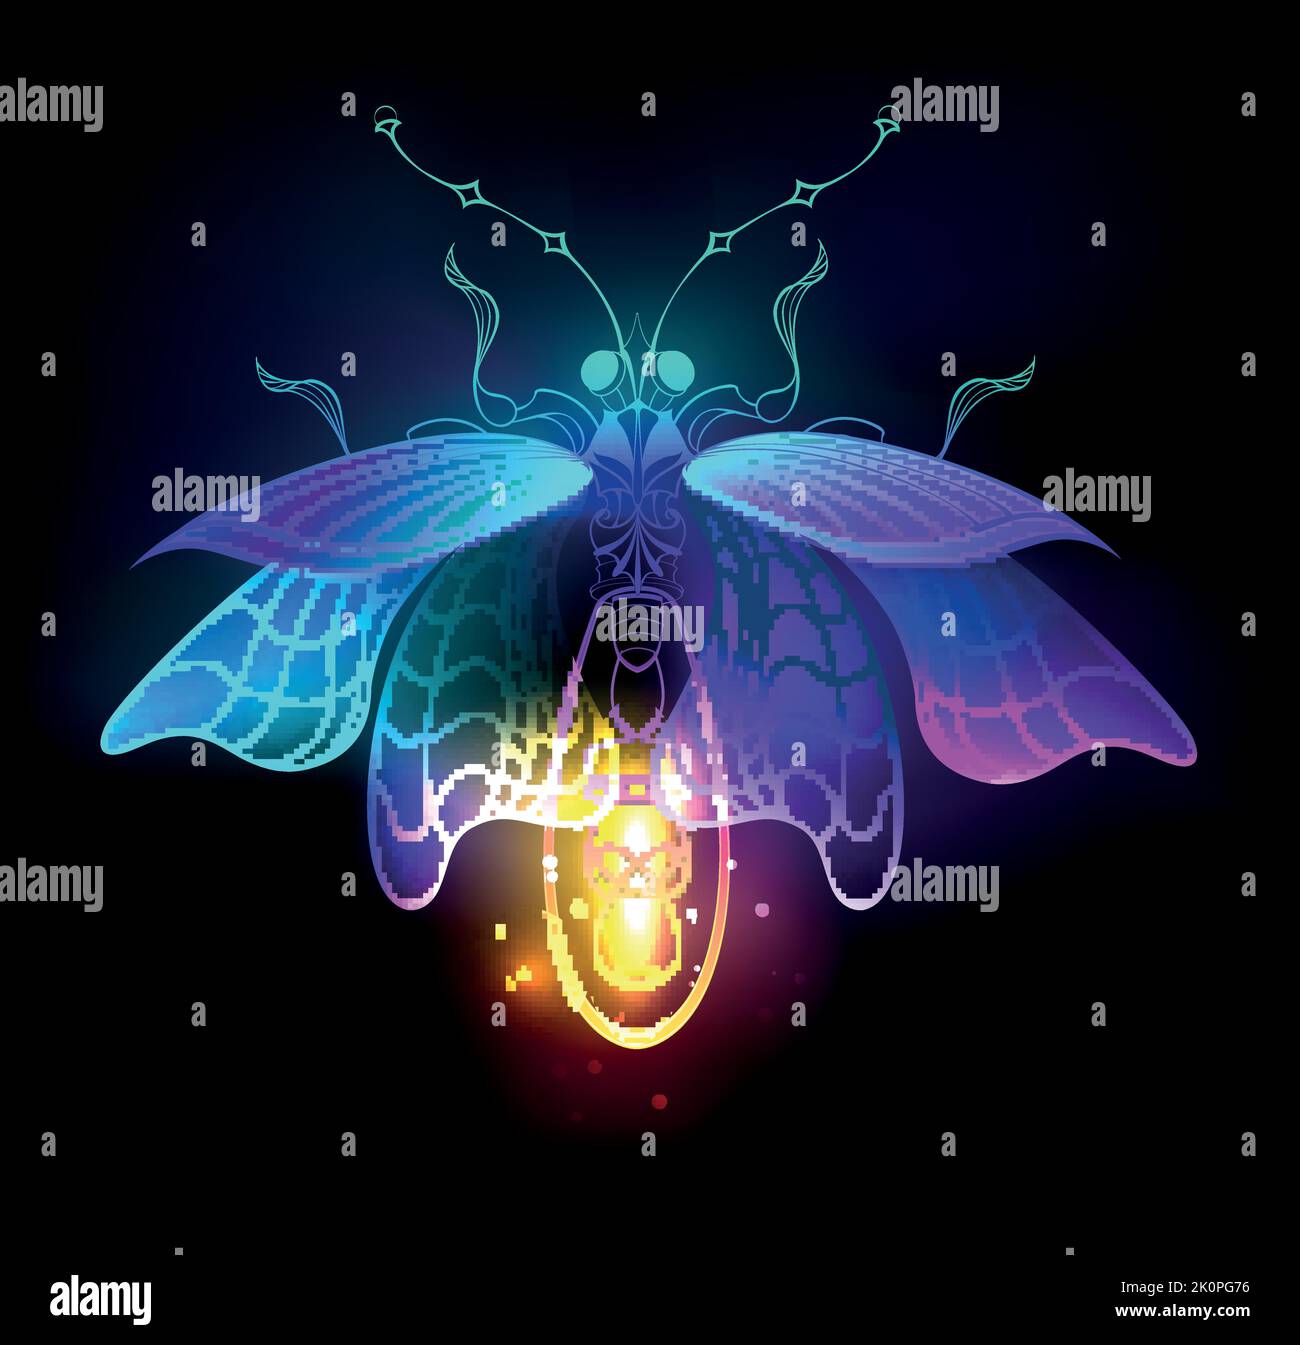 Antique, mechanical firefly with light bulb and thin wings glows orange, purple, turquoise on black background. Steampunk style. Stock Vector